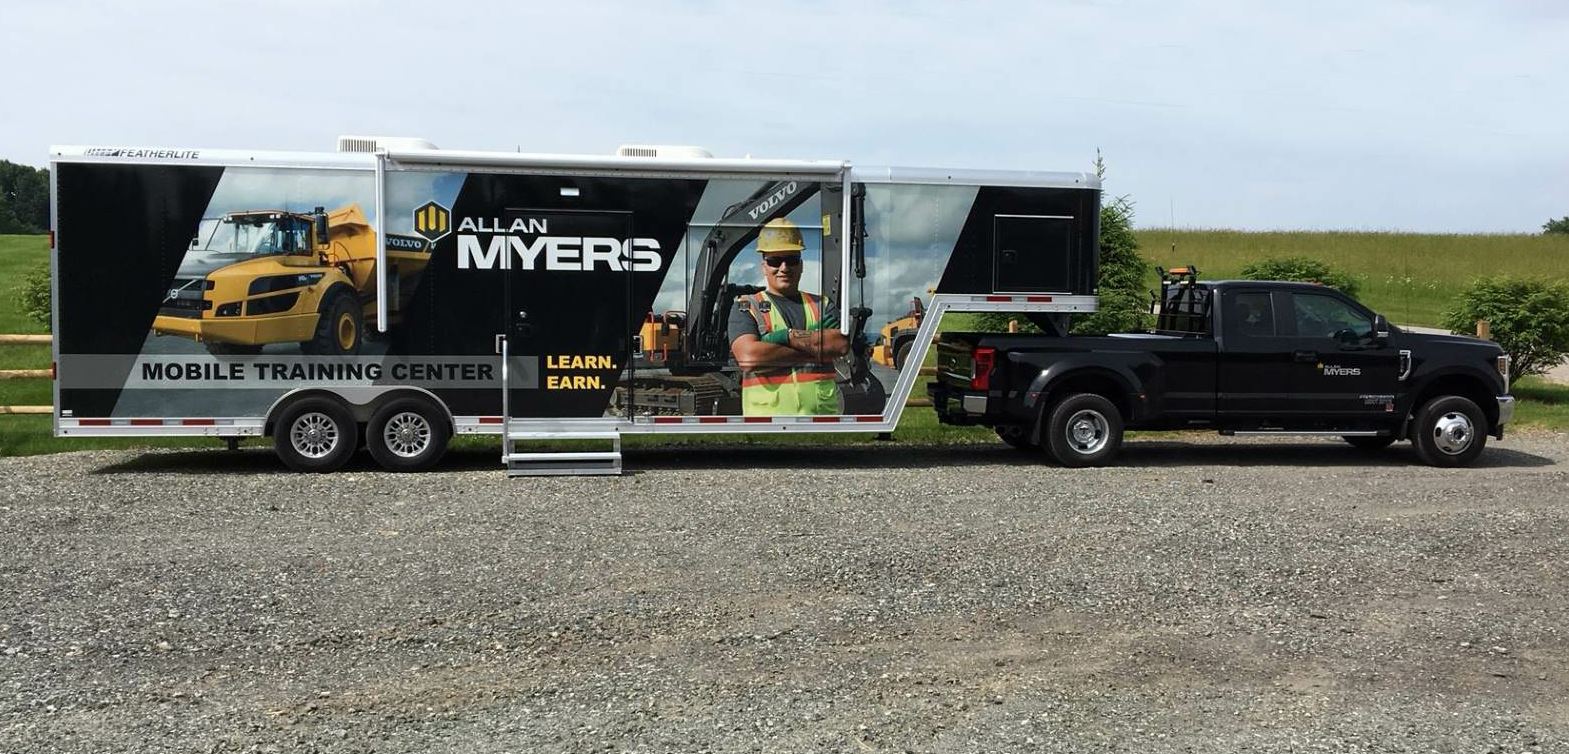 This Volvo CE advanced training simulator is stationed in the Myers Mobile Training Center where employees can try out new skills with lifelike 3-D graphics coupled with an electrically controlled full-motion platform.